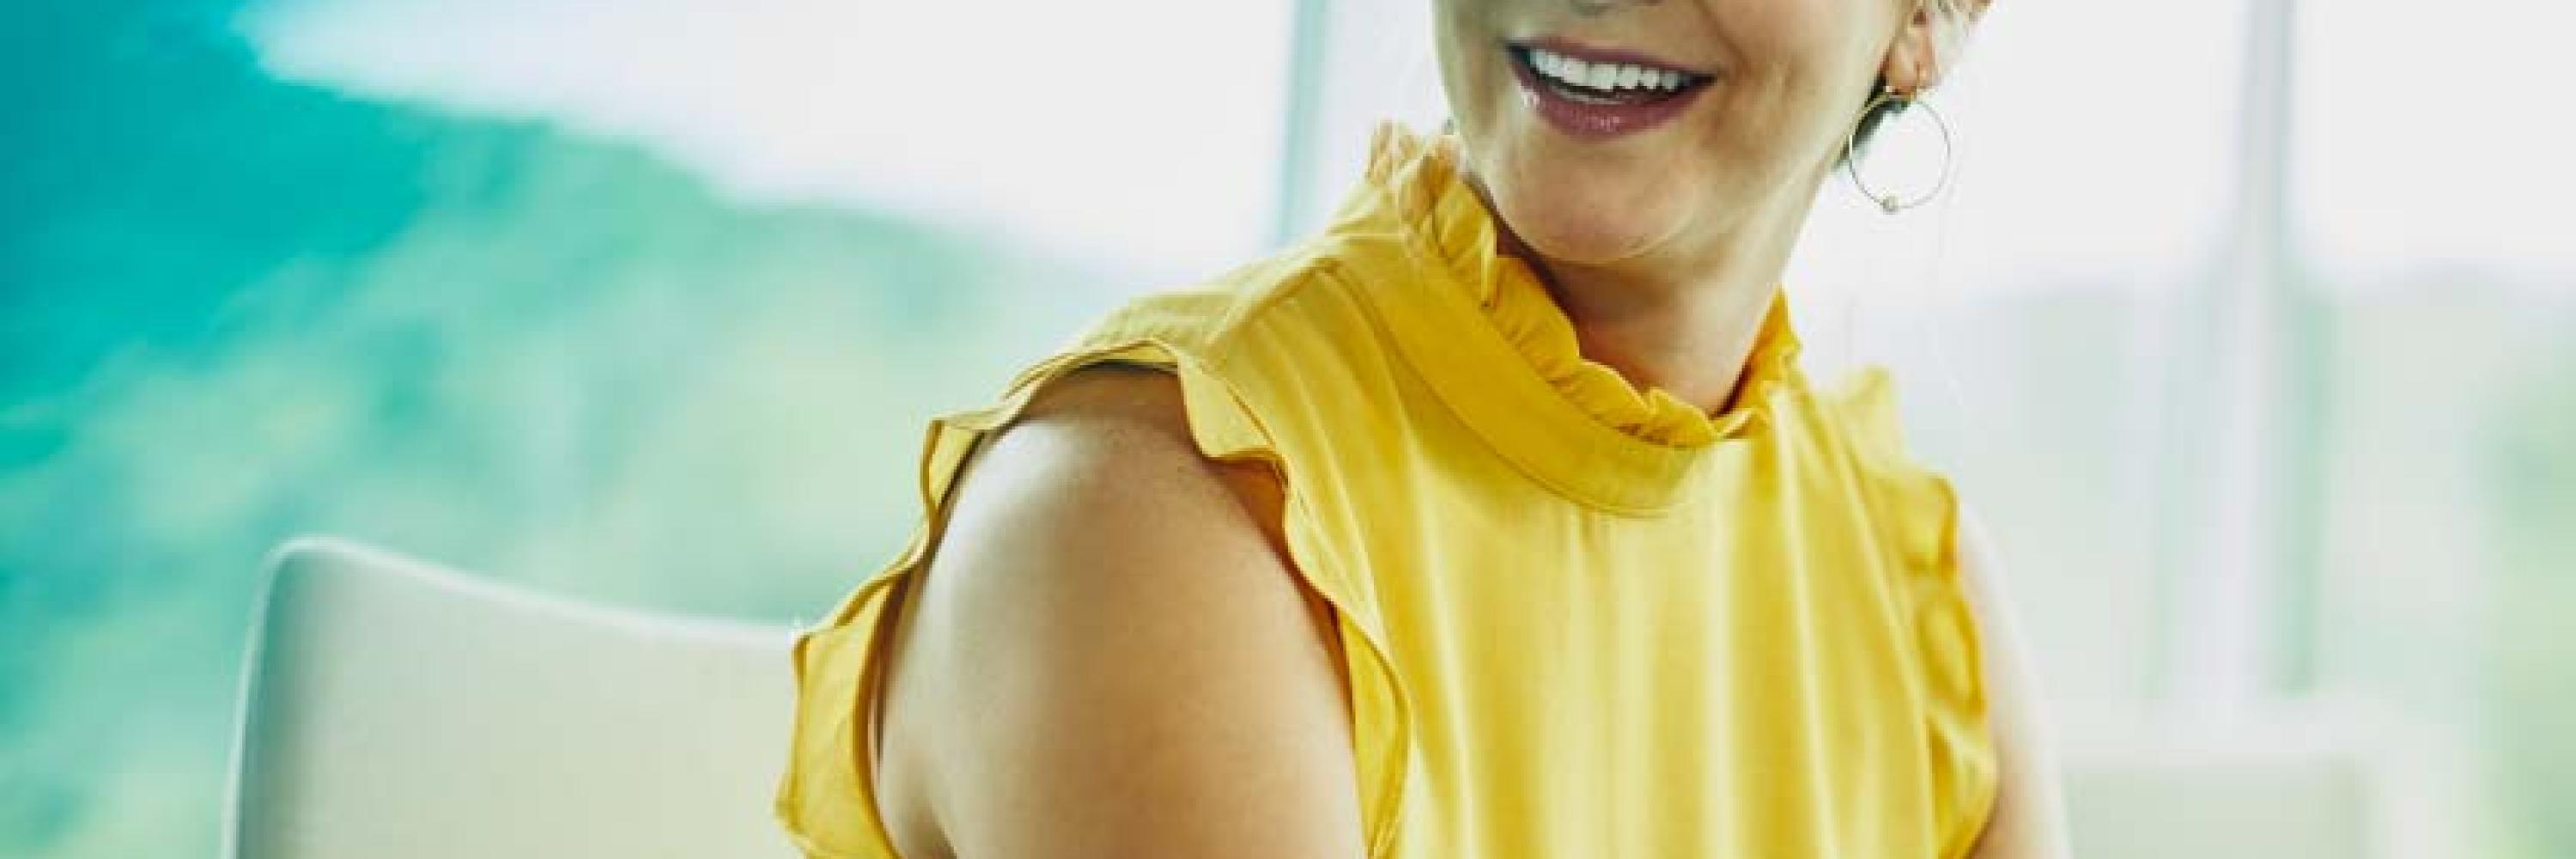 lady in yellow top smiling